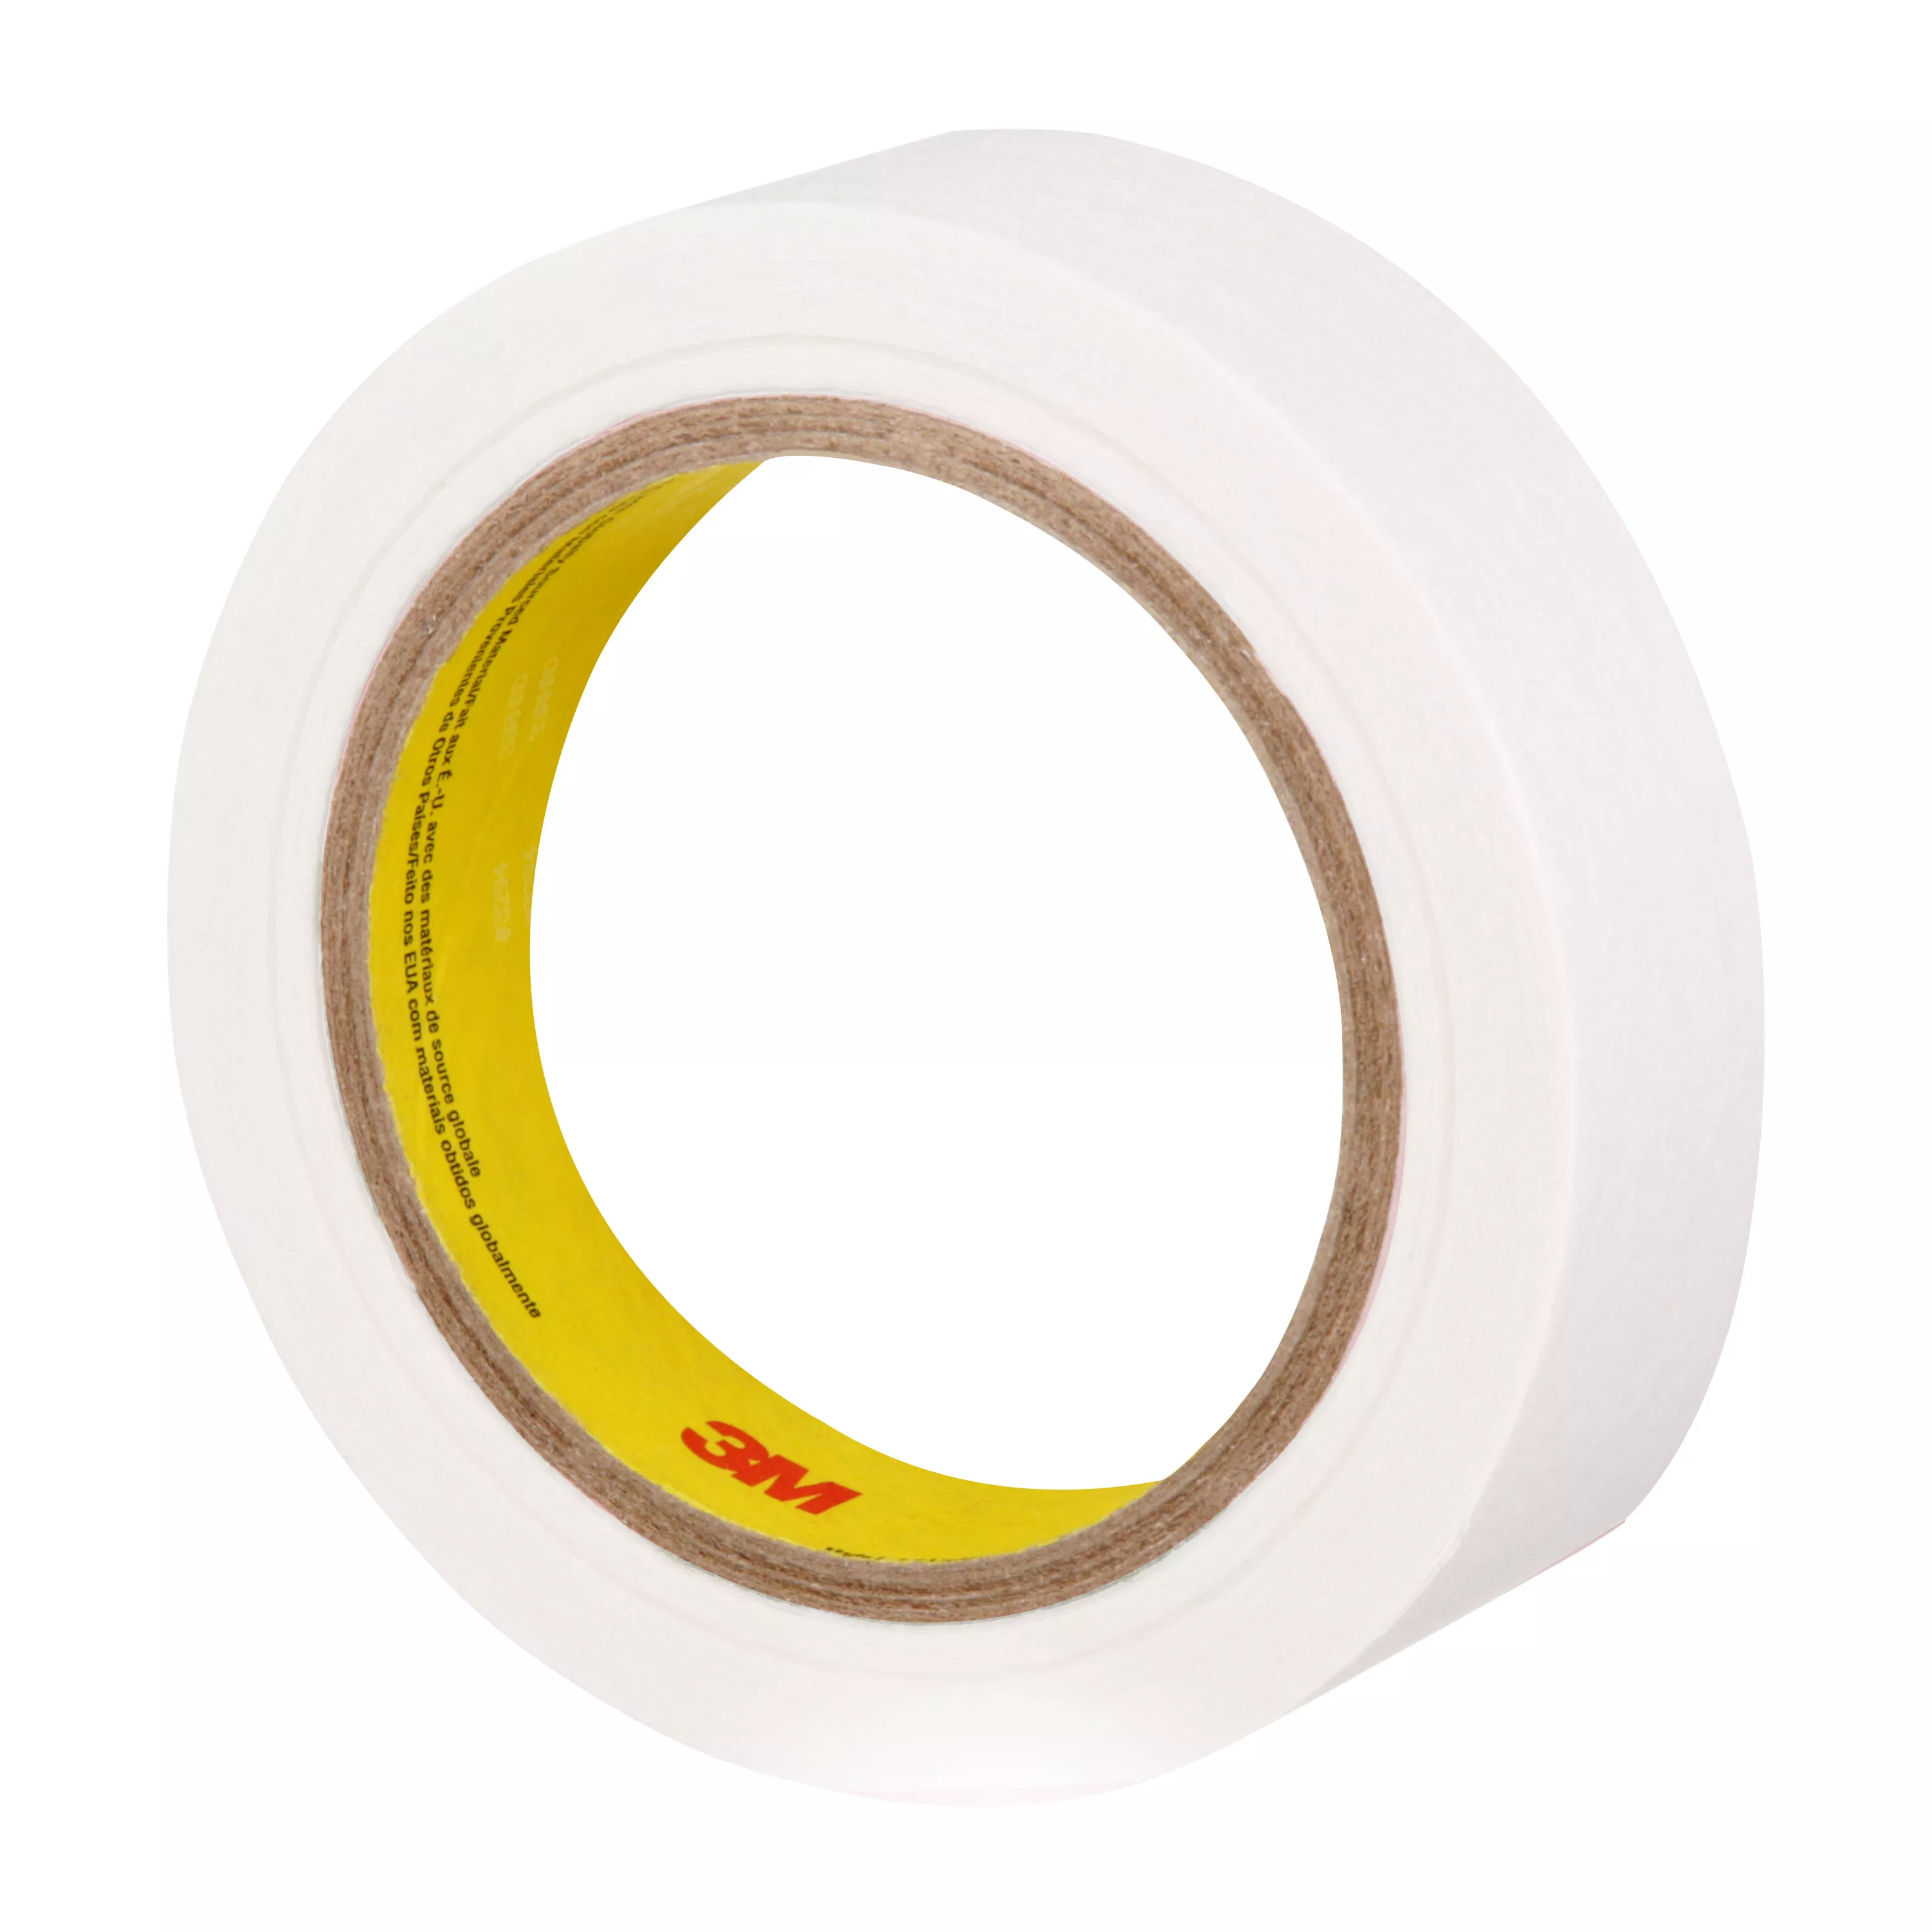 Product Number 394 | 3M™ Vent Tape 394